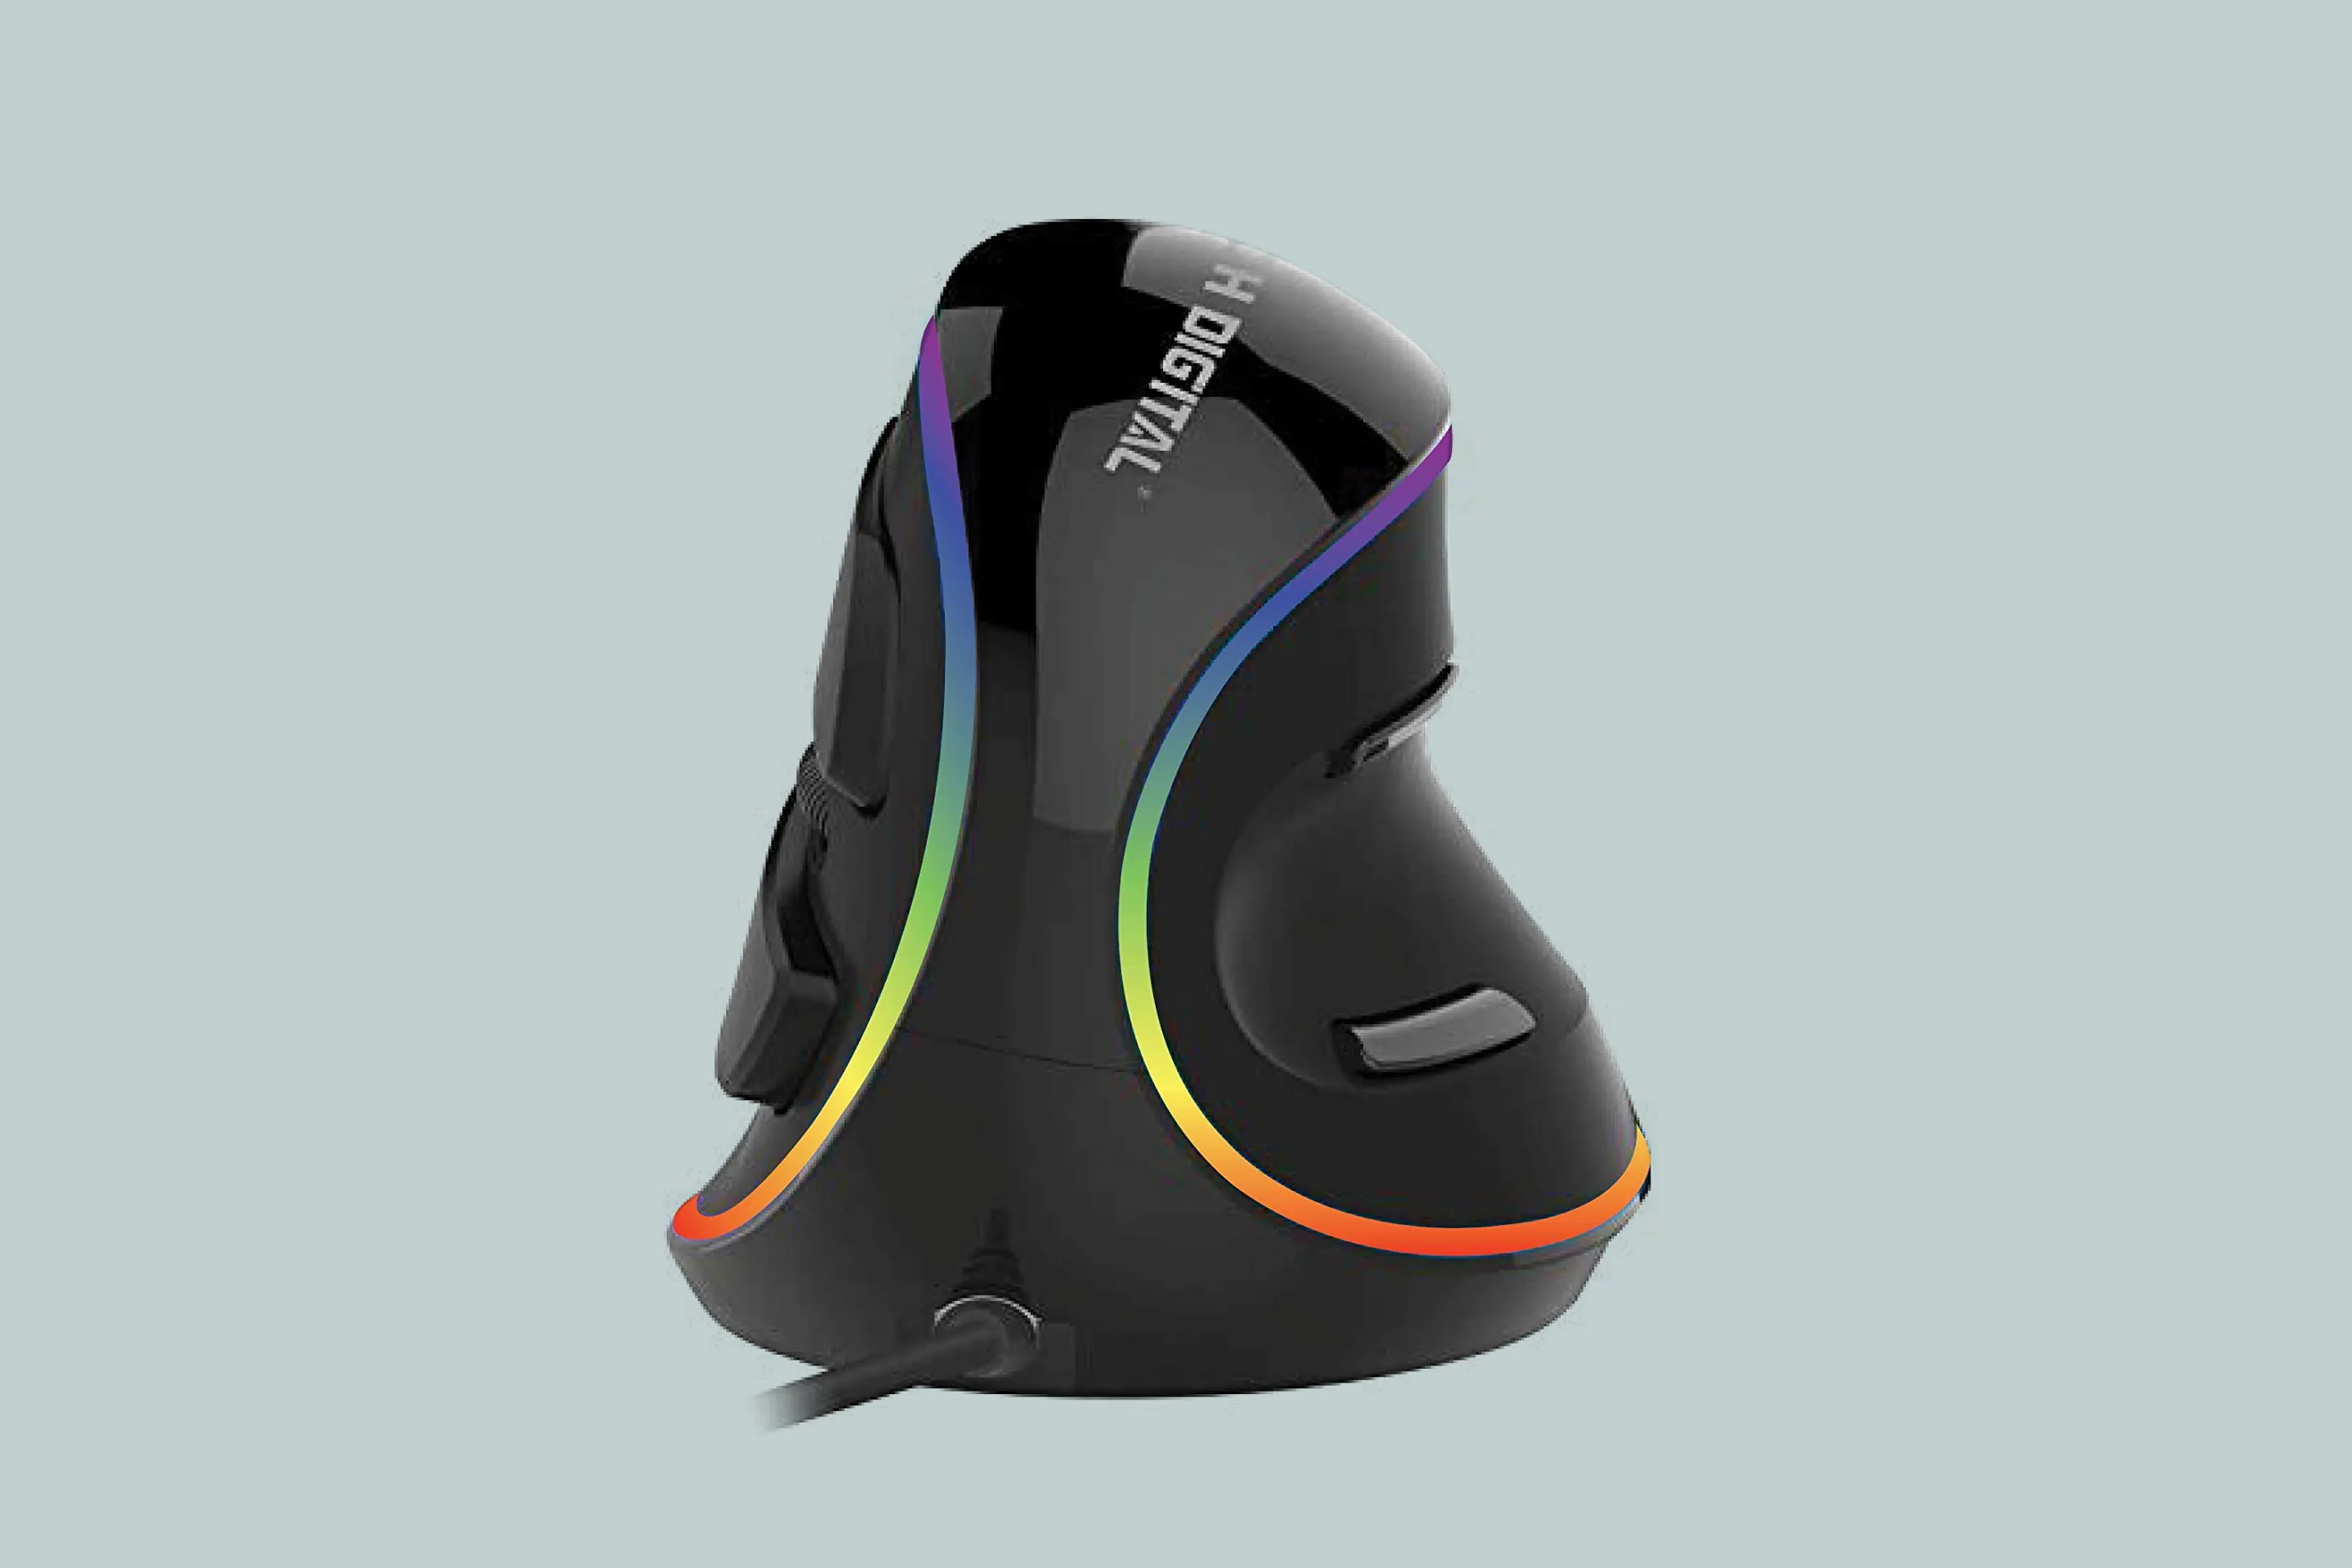 The Best Vertical Mouse